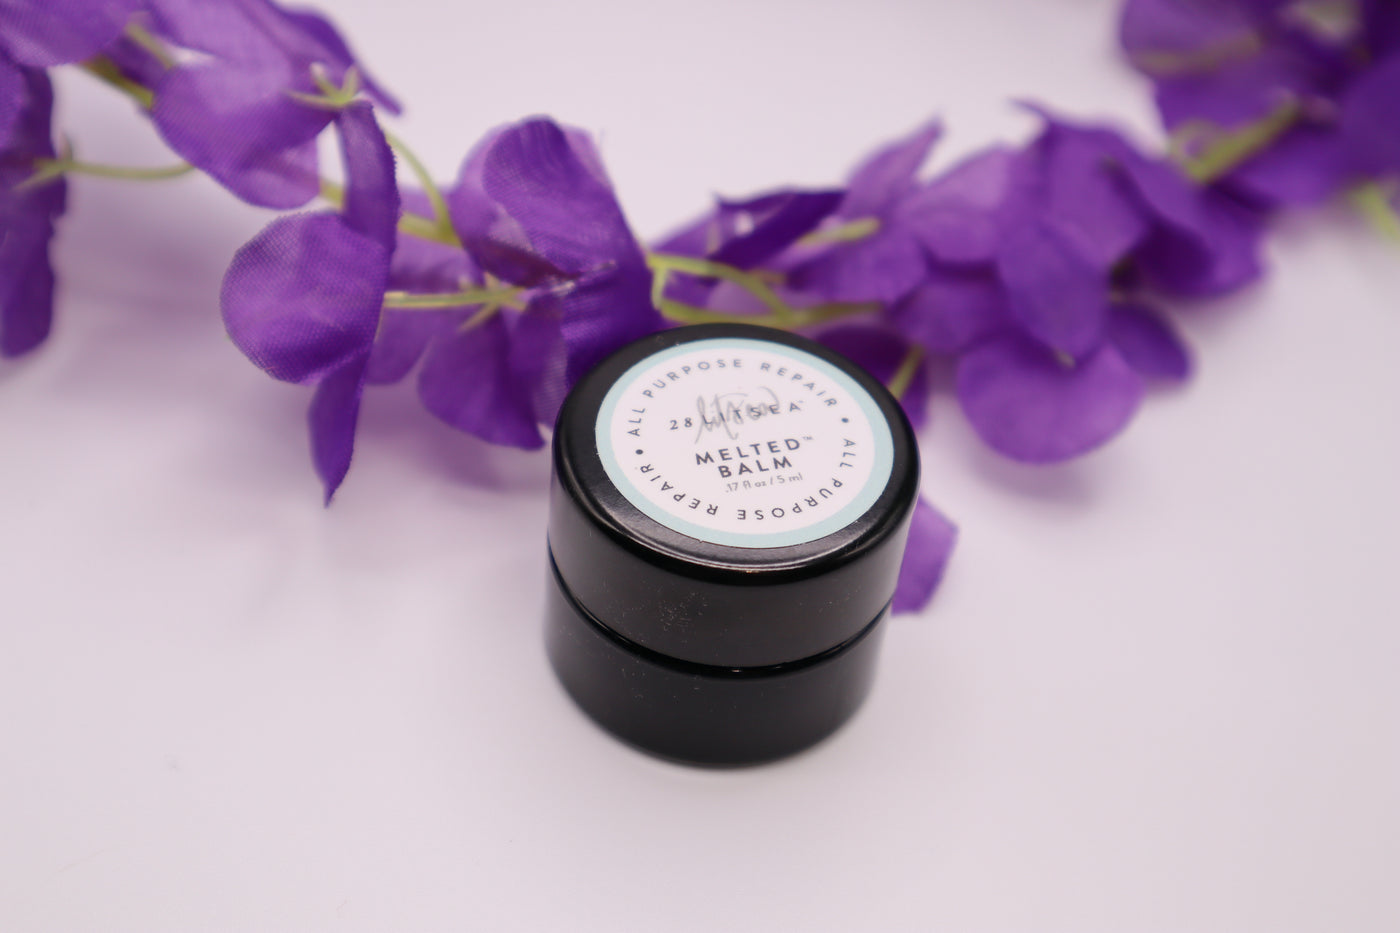 Melted balm is all natural by a small woman owned brand  local to Massachusetts. Use for very chapped lips or cuticles or even as a lip primer before adding to lipstick.